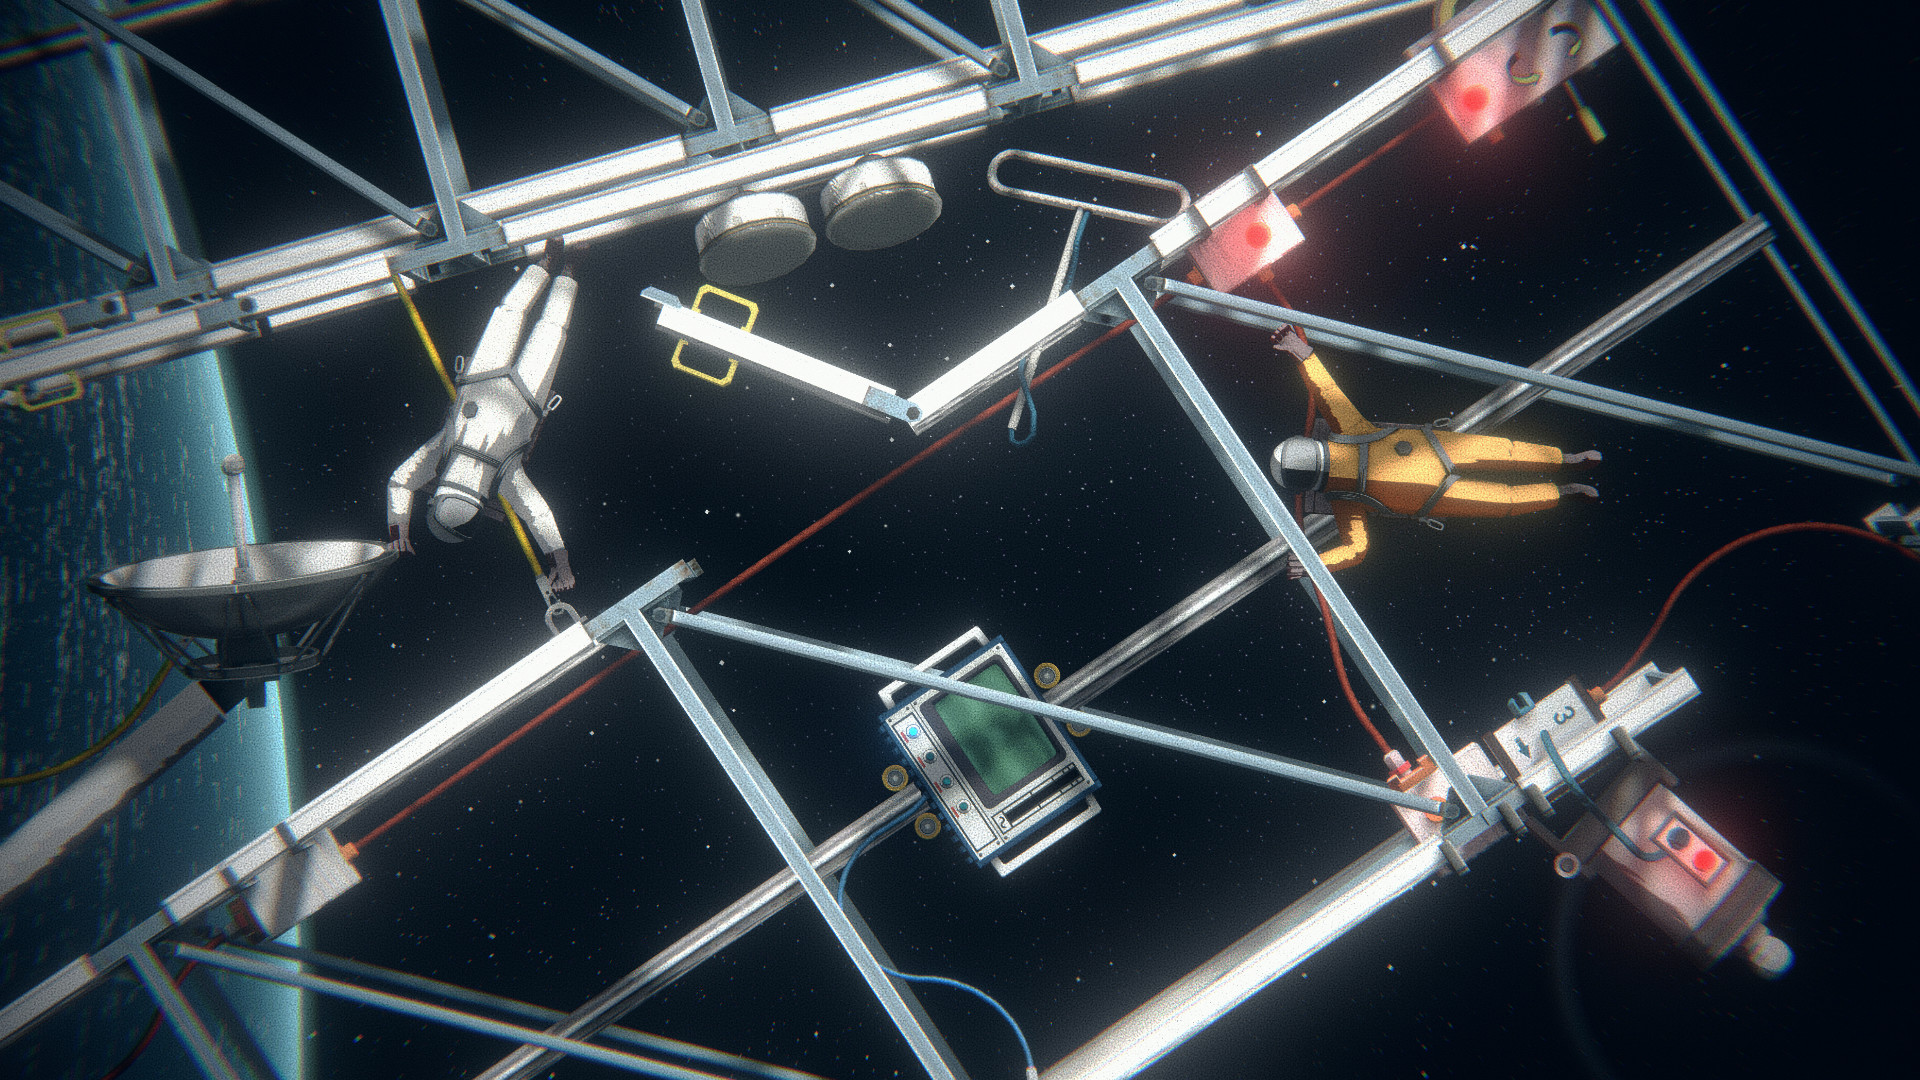 Space Physics Game 'Heavenly Bodies' Gets 4-Player Co-op and Major DLC